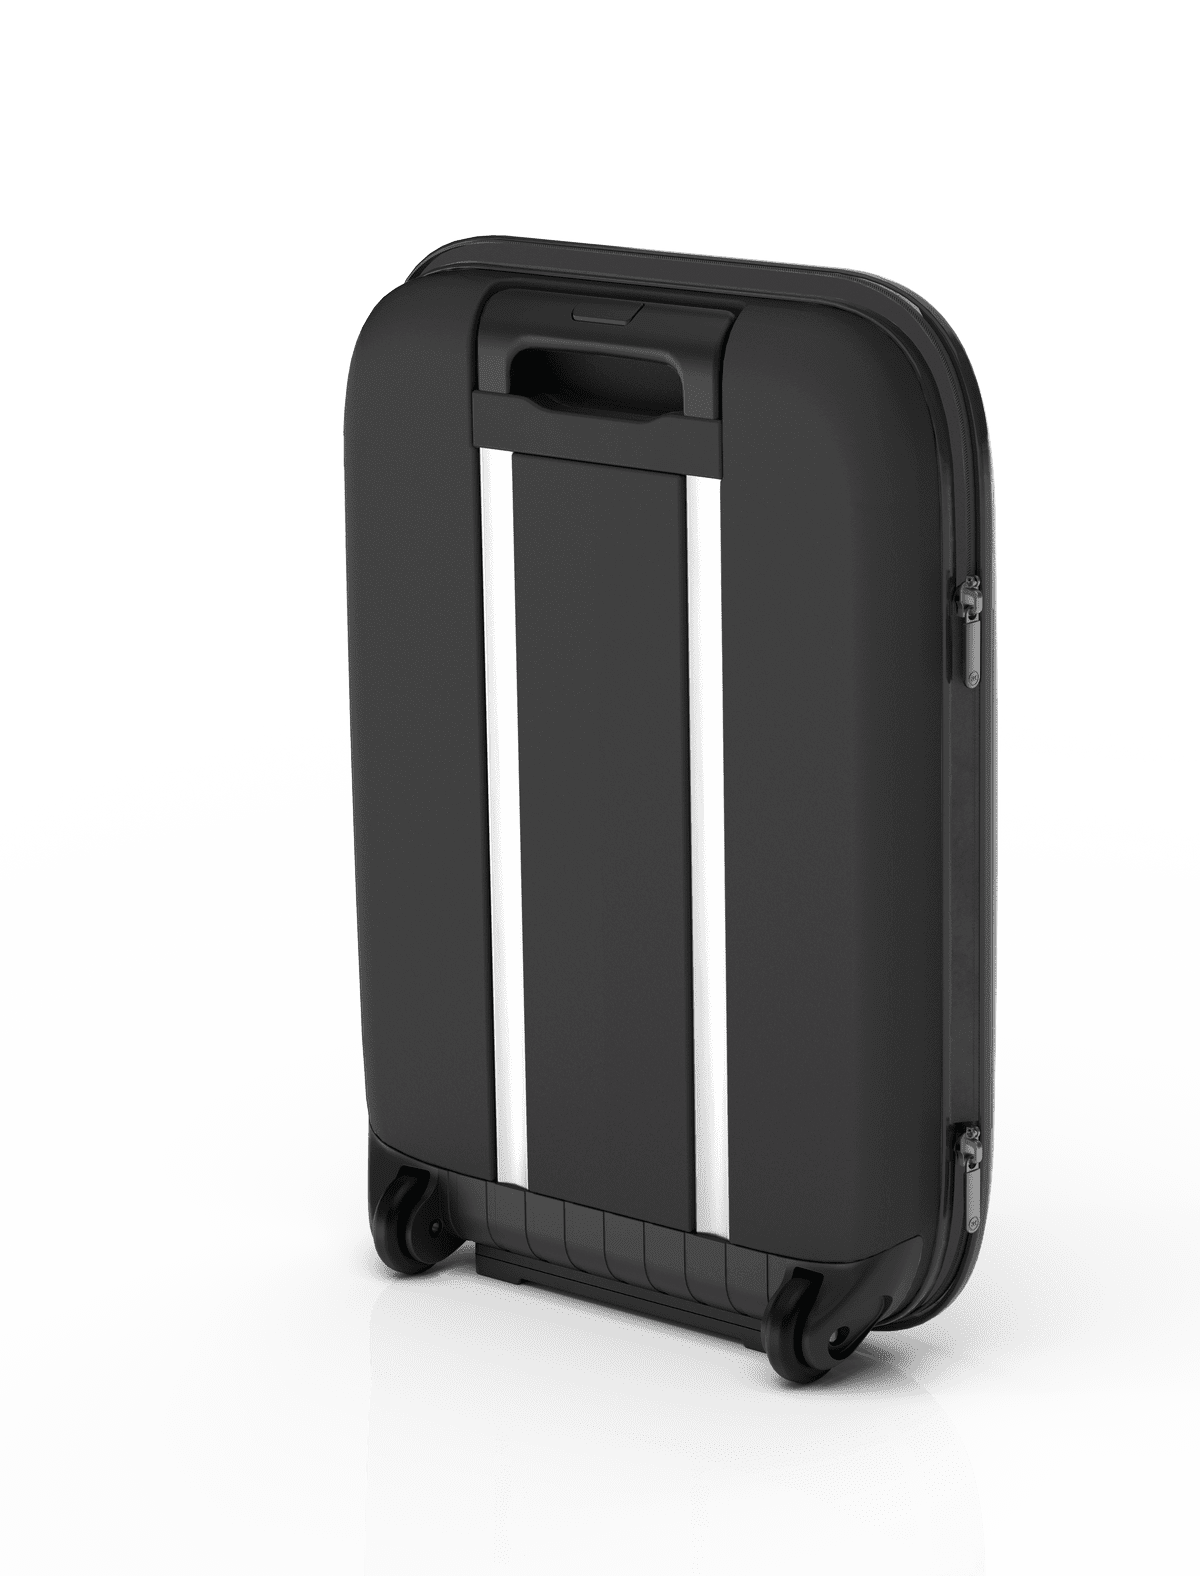 Rollink Flex Vega Carry-On Collapsible Luggage